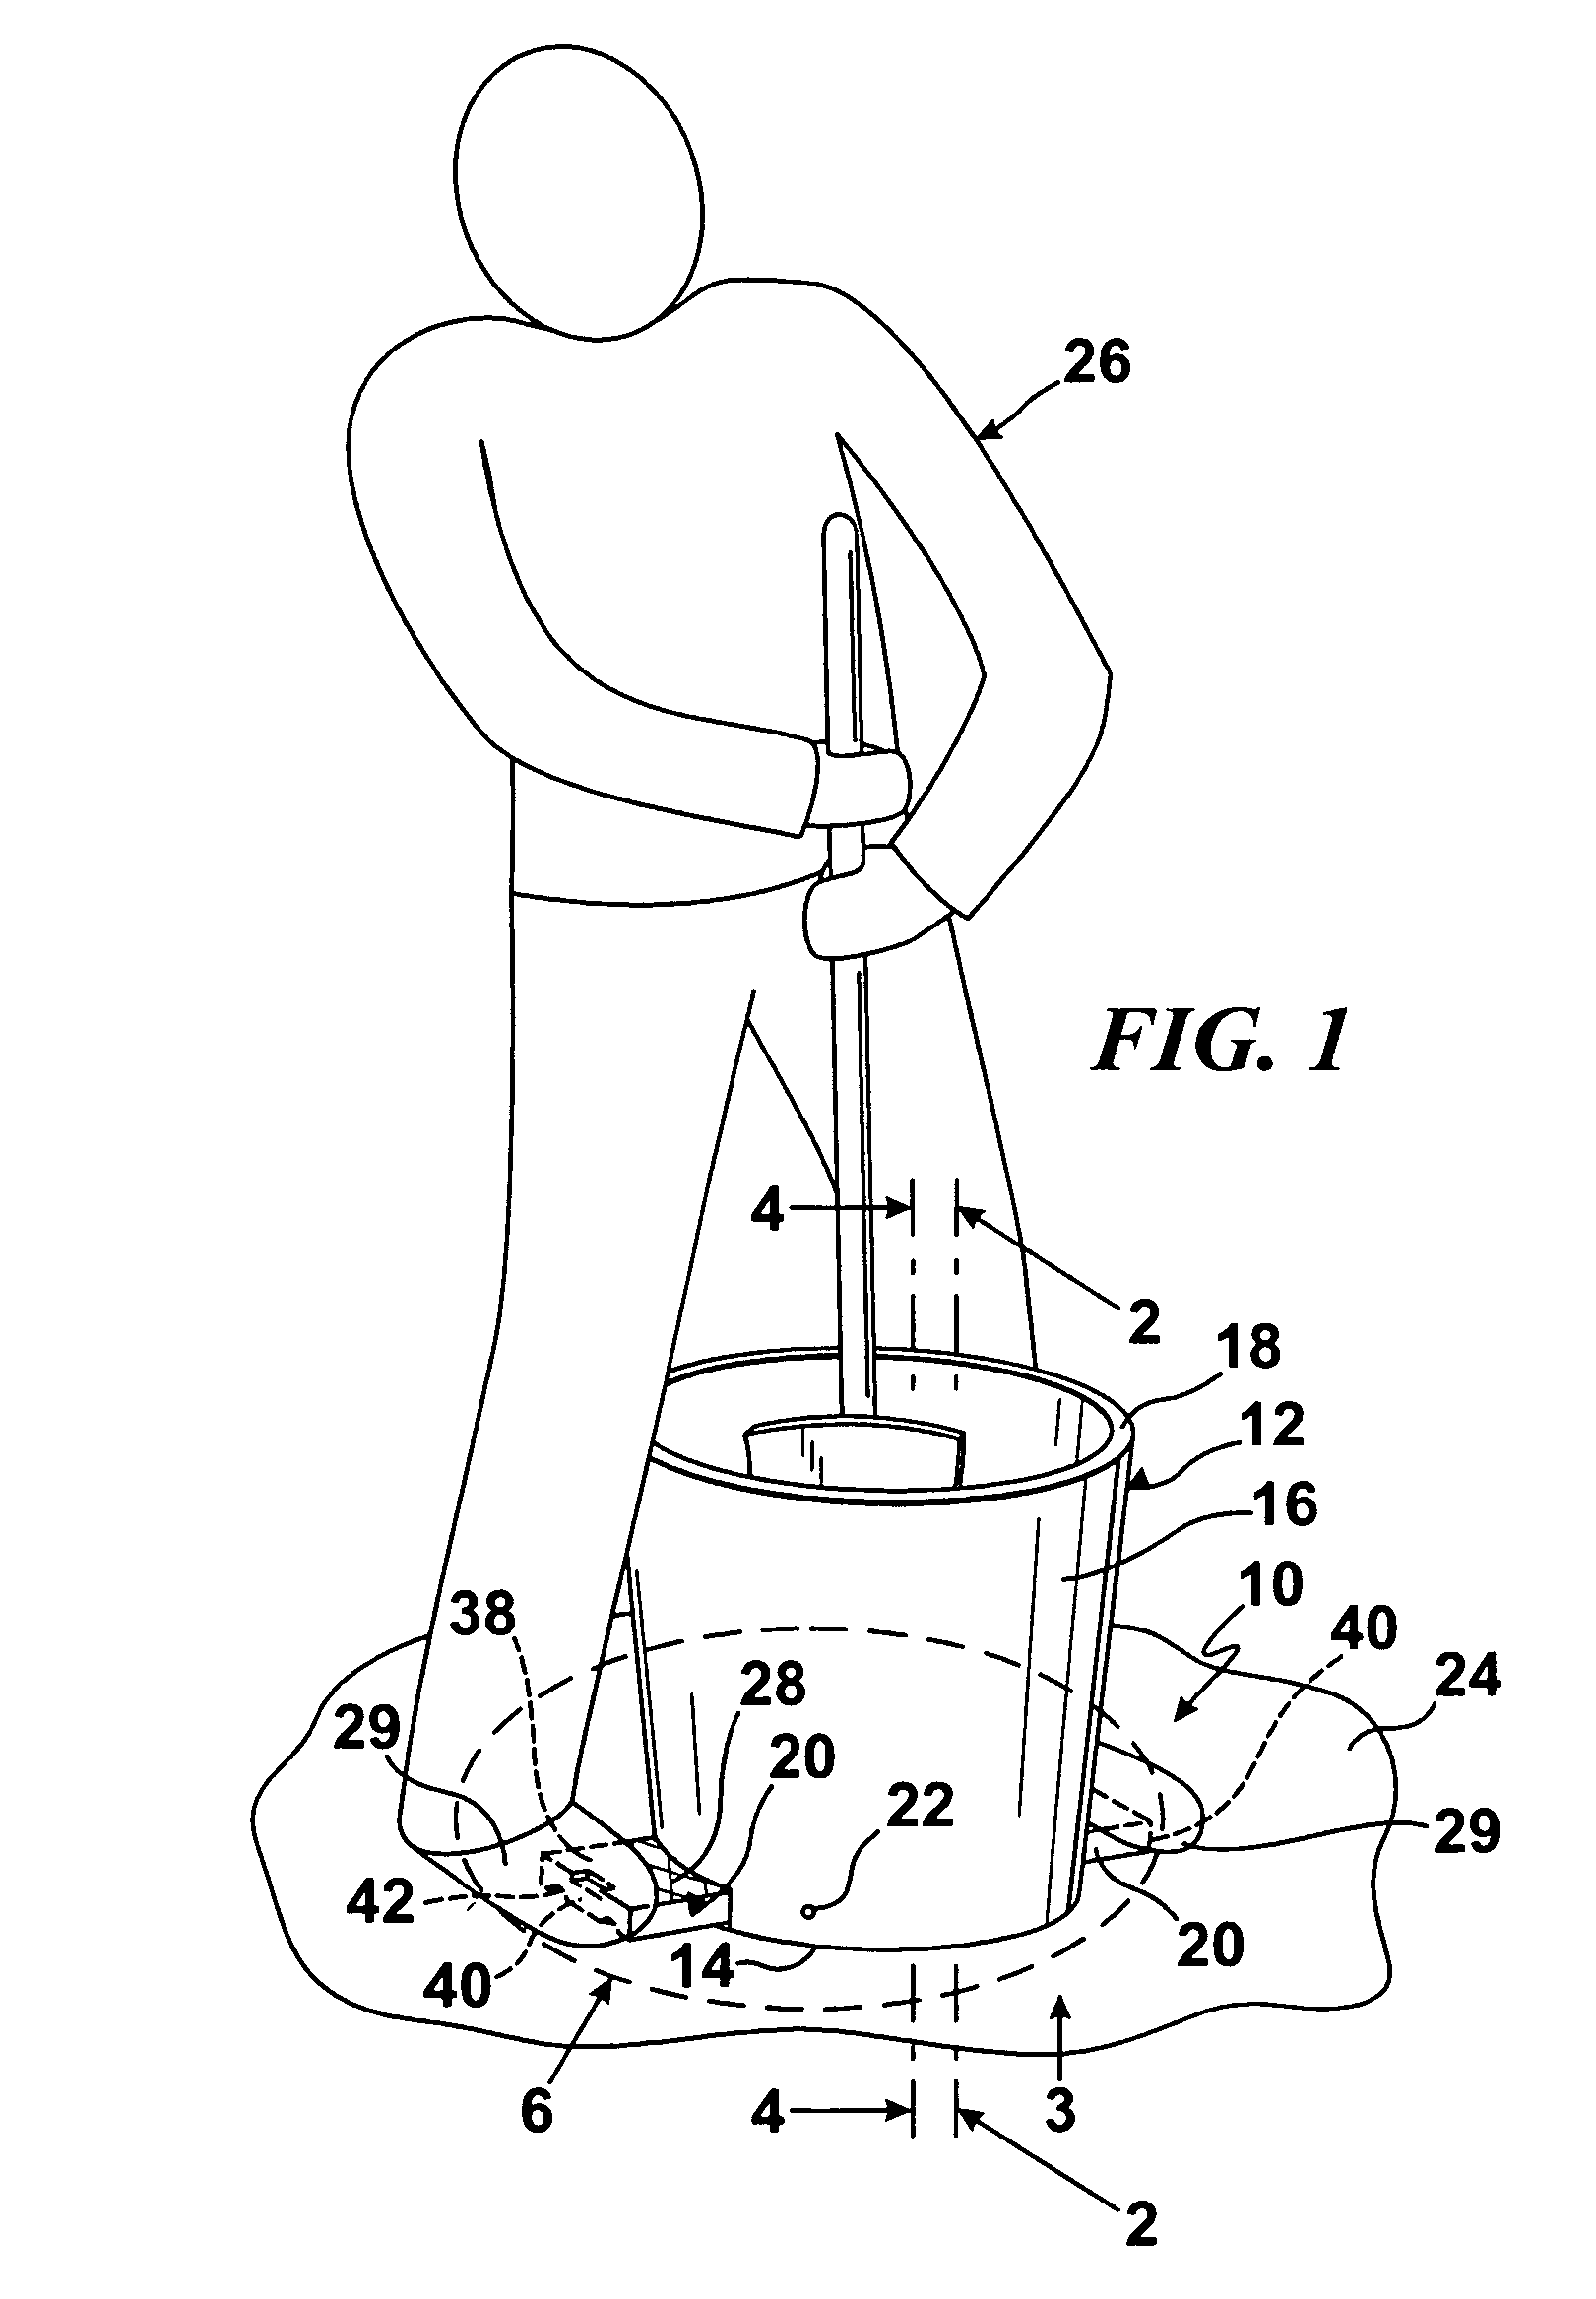 Apparatus for holding a stackable bucket in place when mixing materials therein